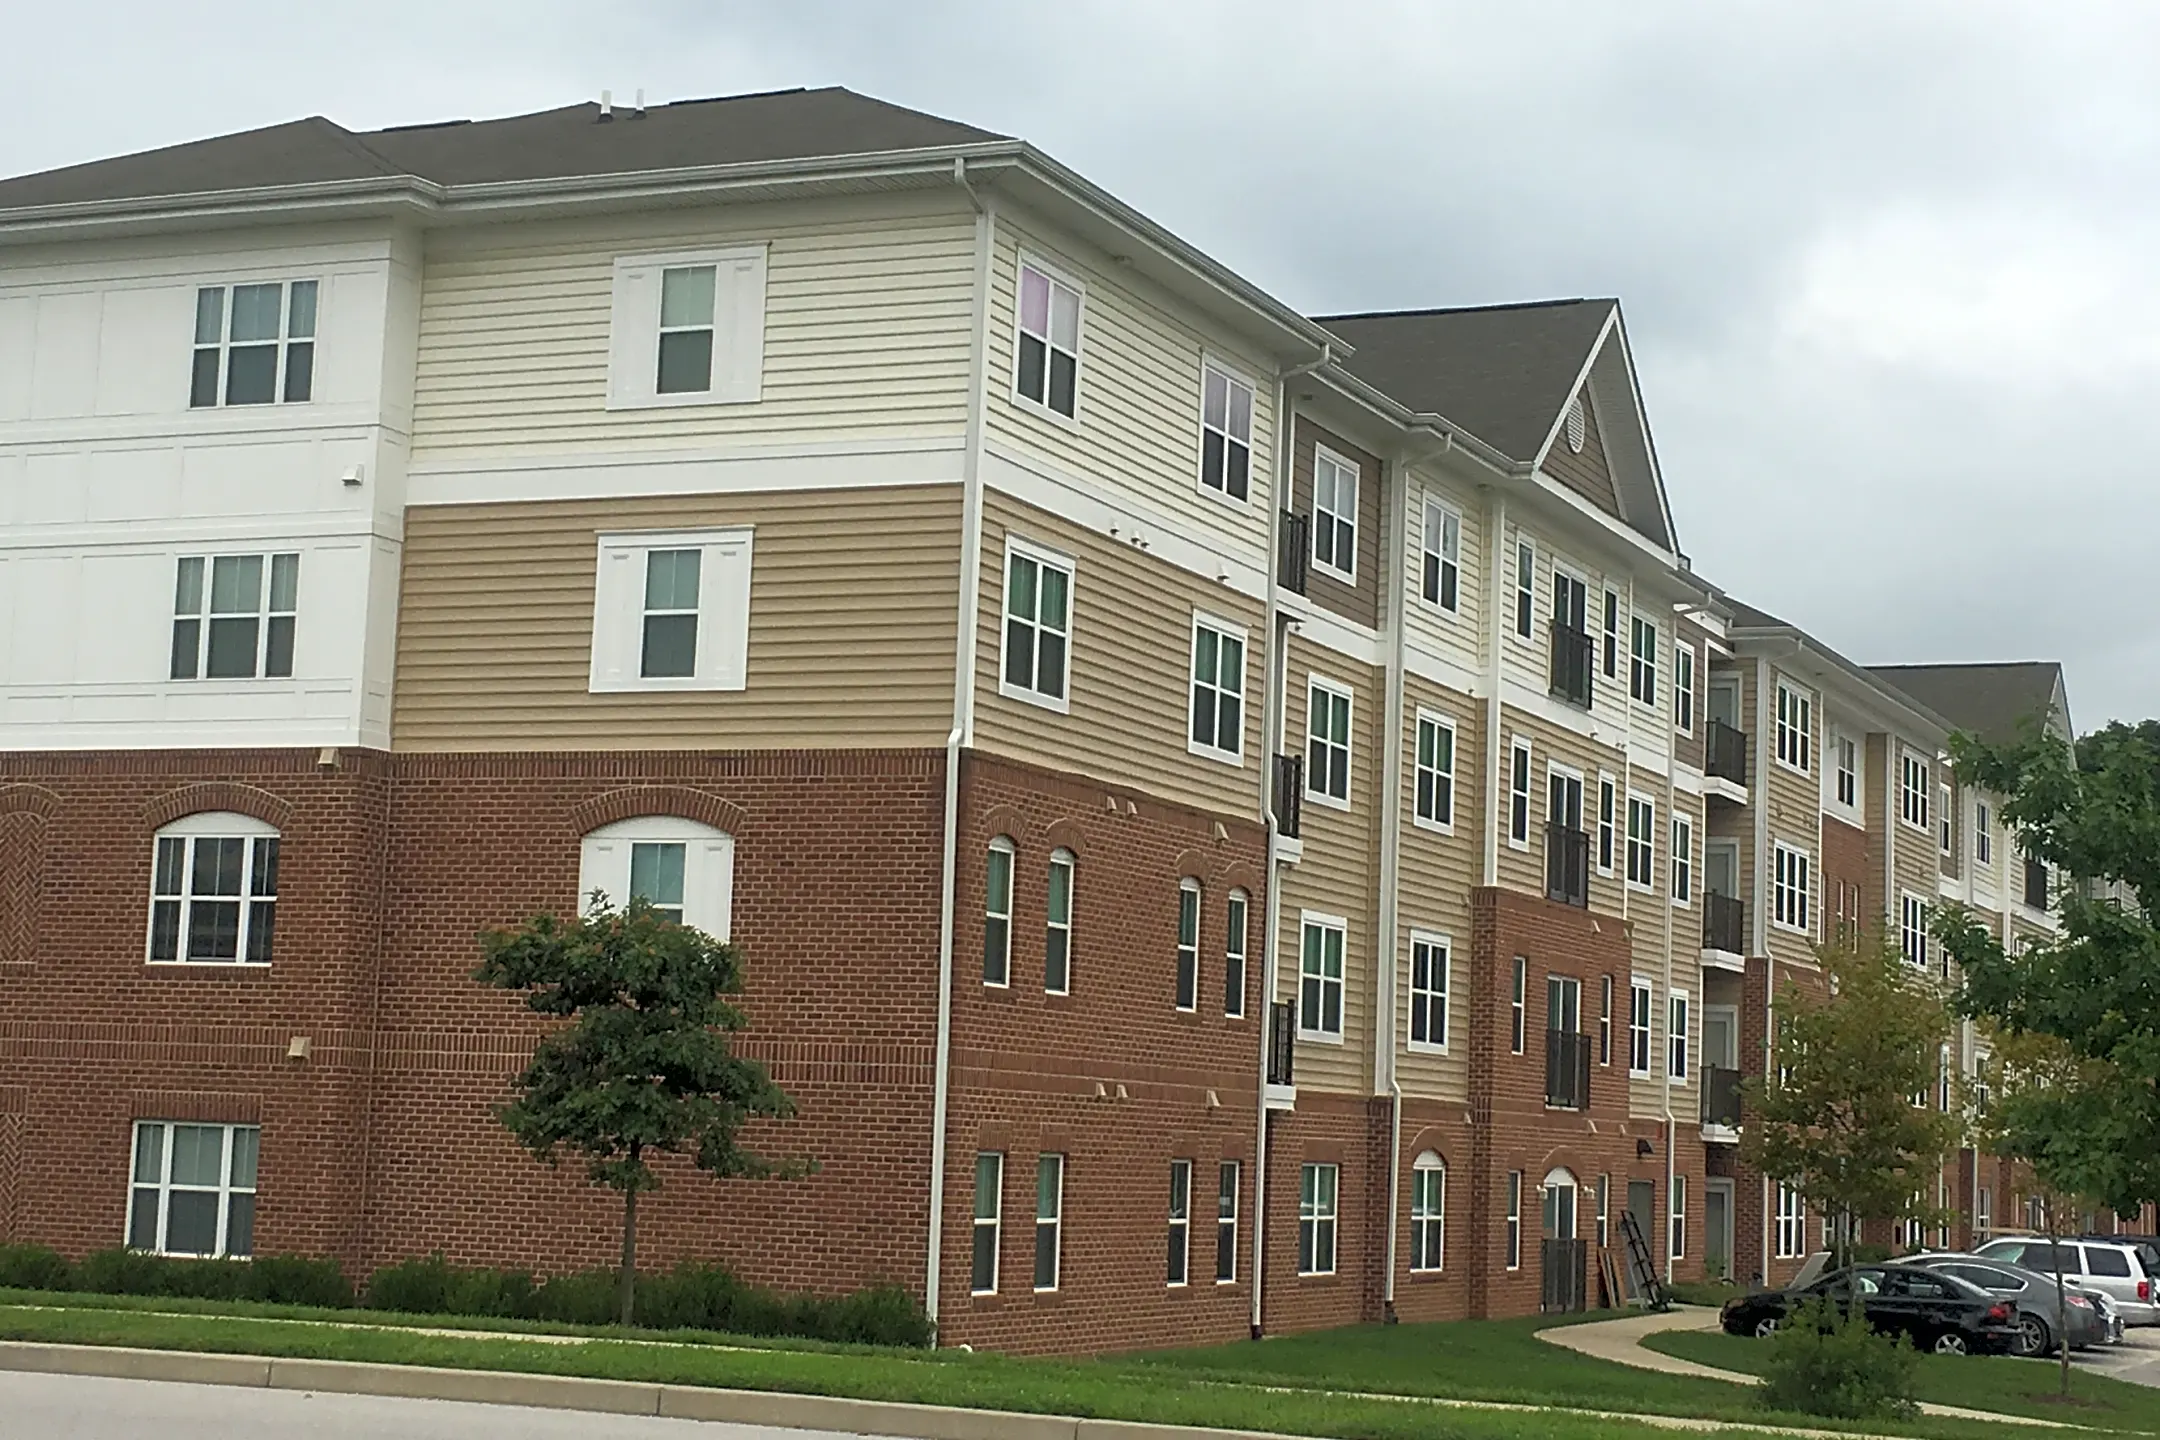 Pool - Orchard Meadows Apartments/Clubhouse/Pool (142 Units) - Ellicott City, MD